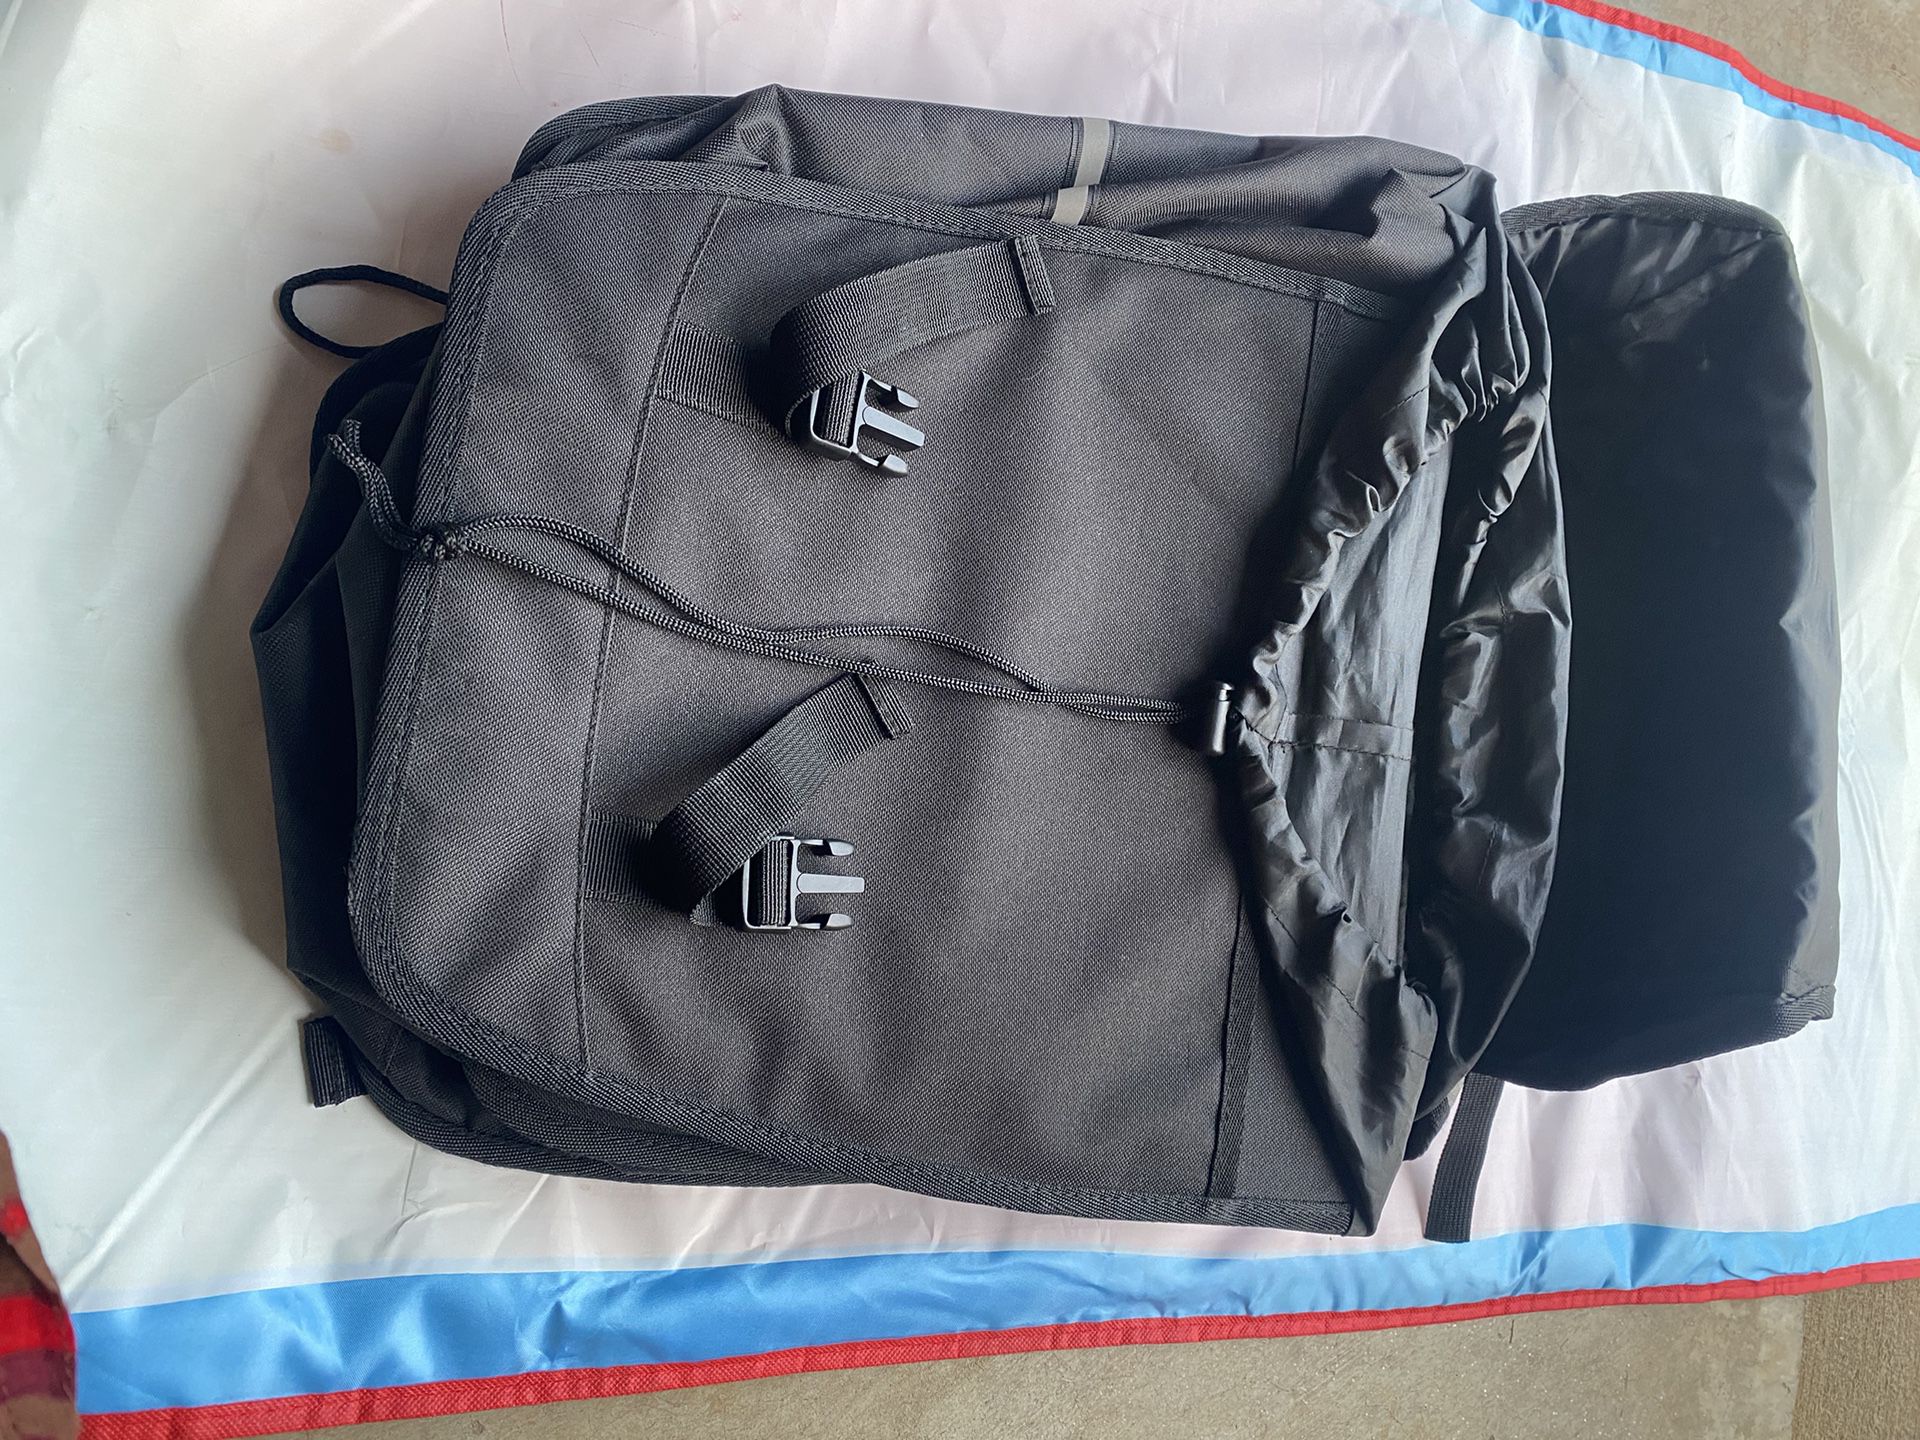 Macgregor Duffle Bag for Sale in Imperial, PA - OfferUp